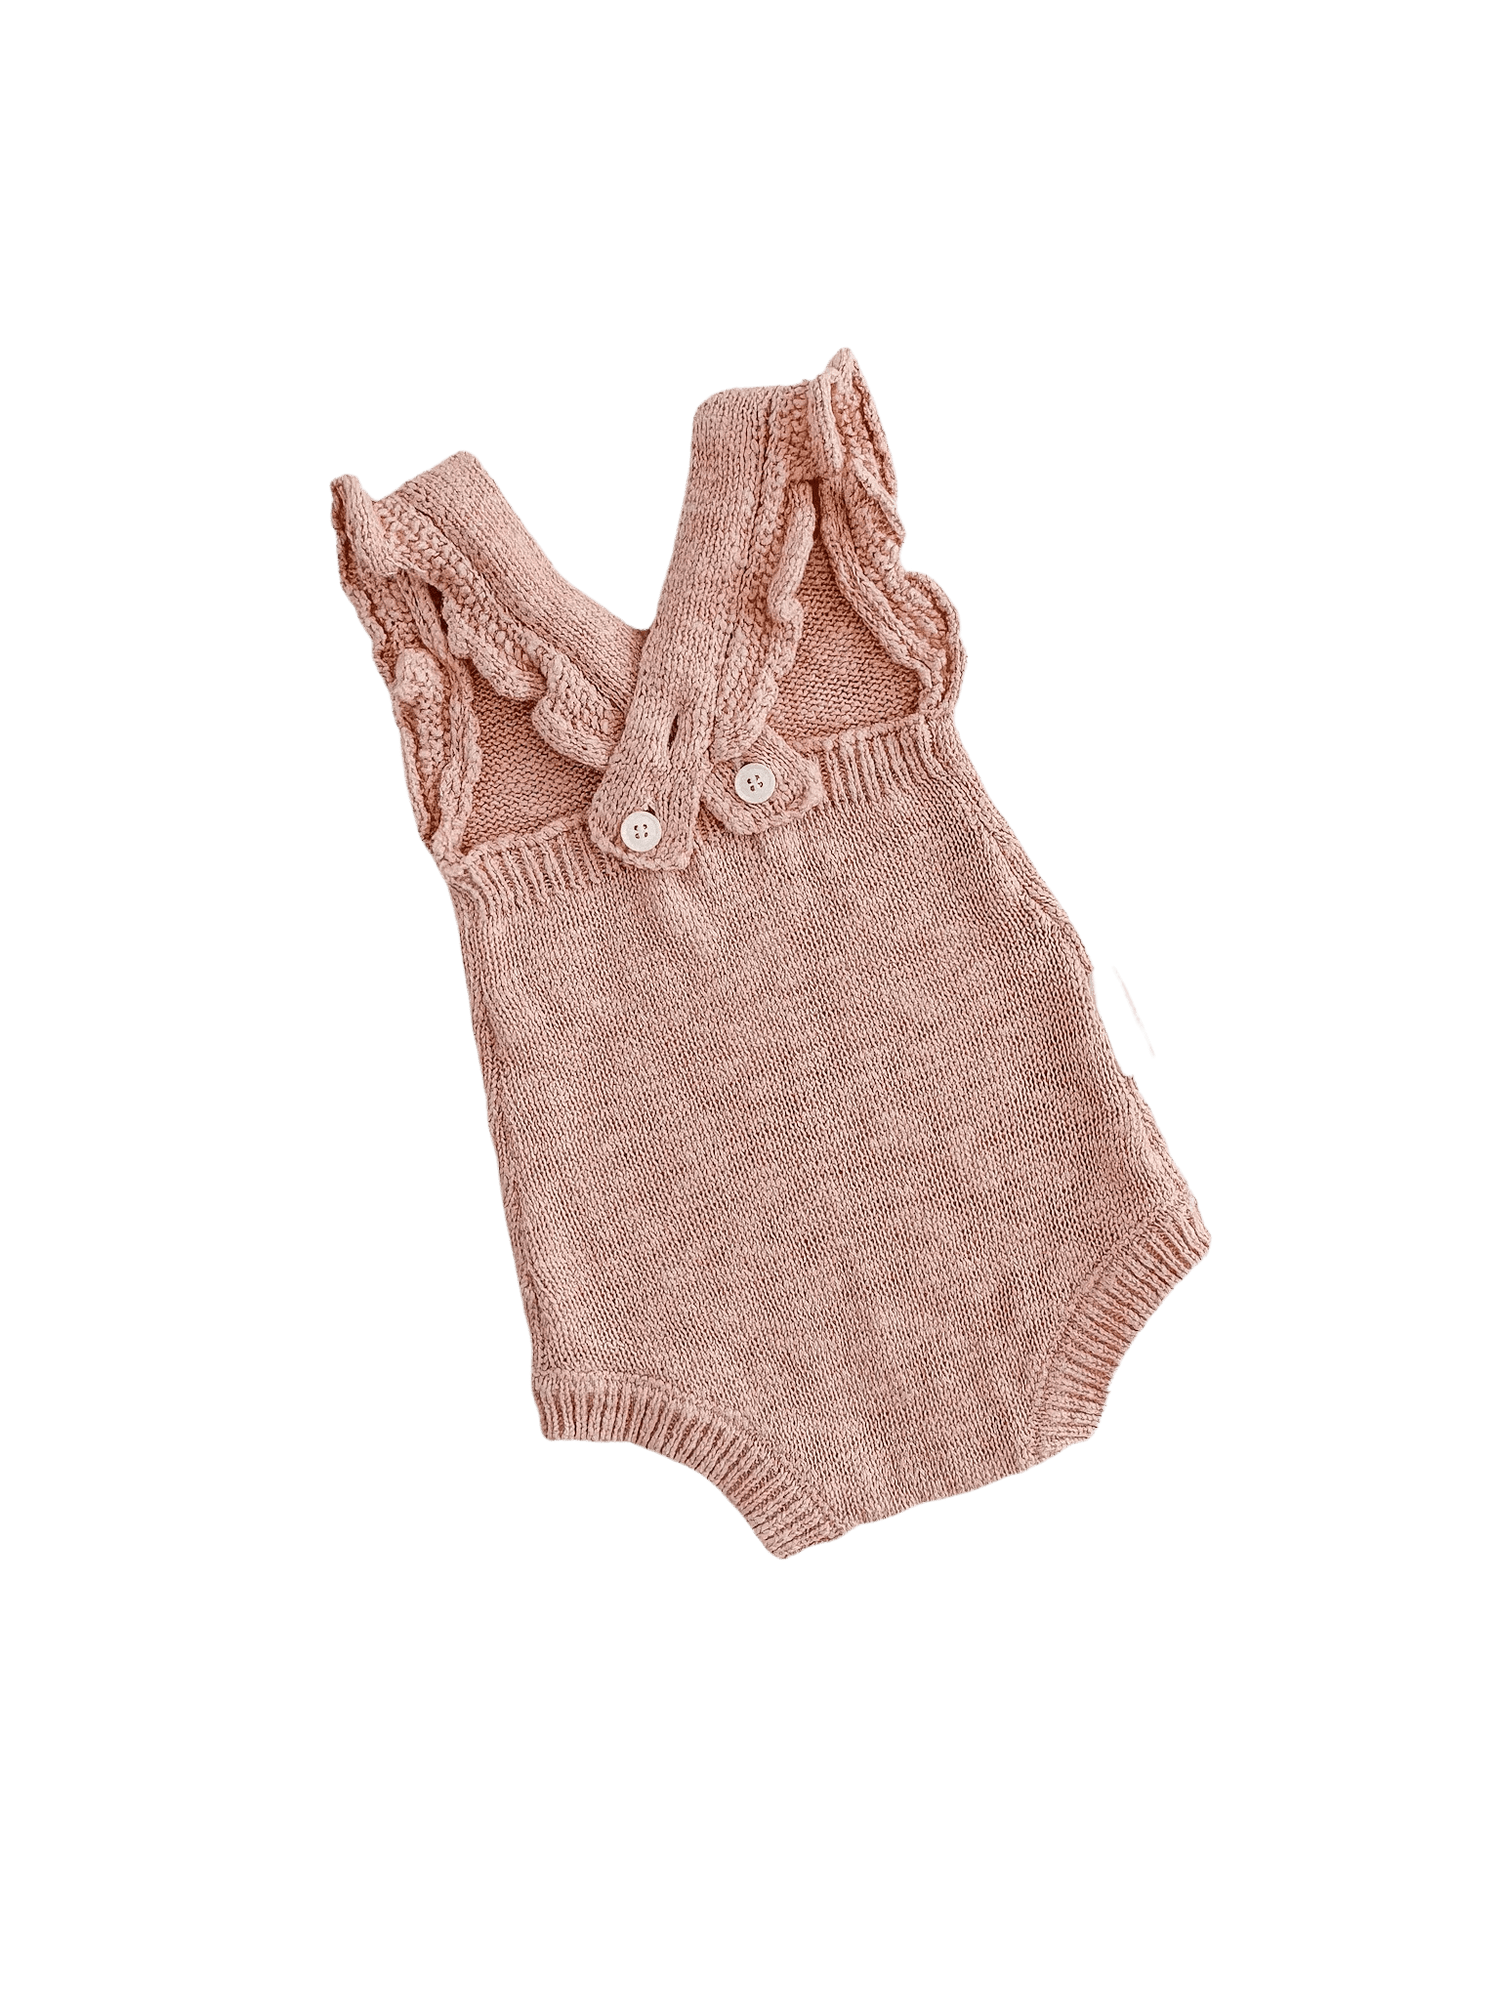 ZIGGY LOU | FRILL ROMPER - ROSE NB by ZIGGY LOU - The Playful Collective